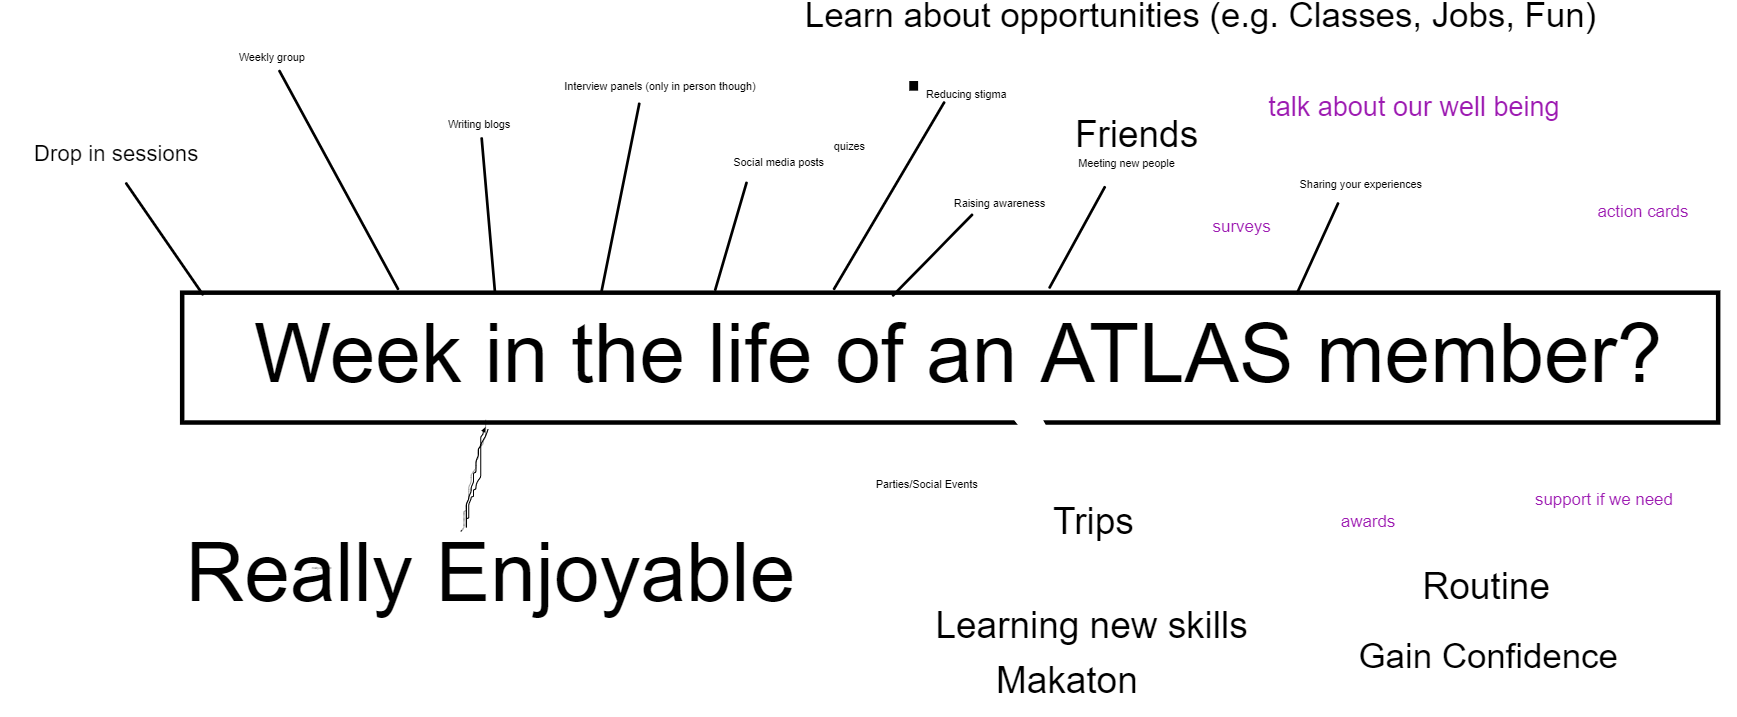 A screenshot of a mind map on "Week in the life of an ATLAS member". The text in the image is written below as it is hard to read due to the low resolution.